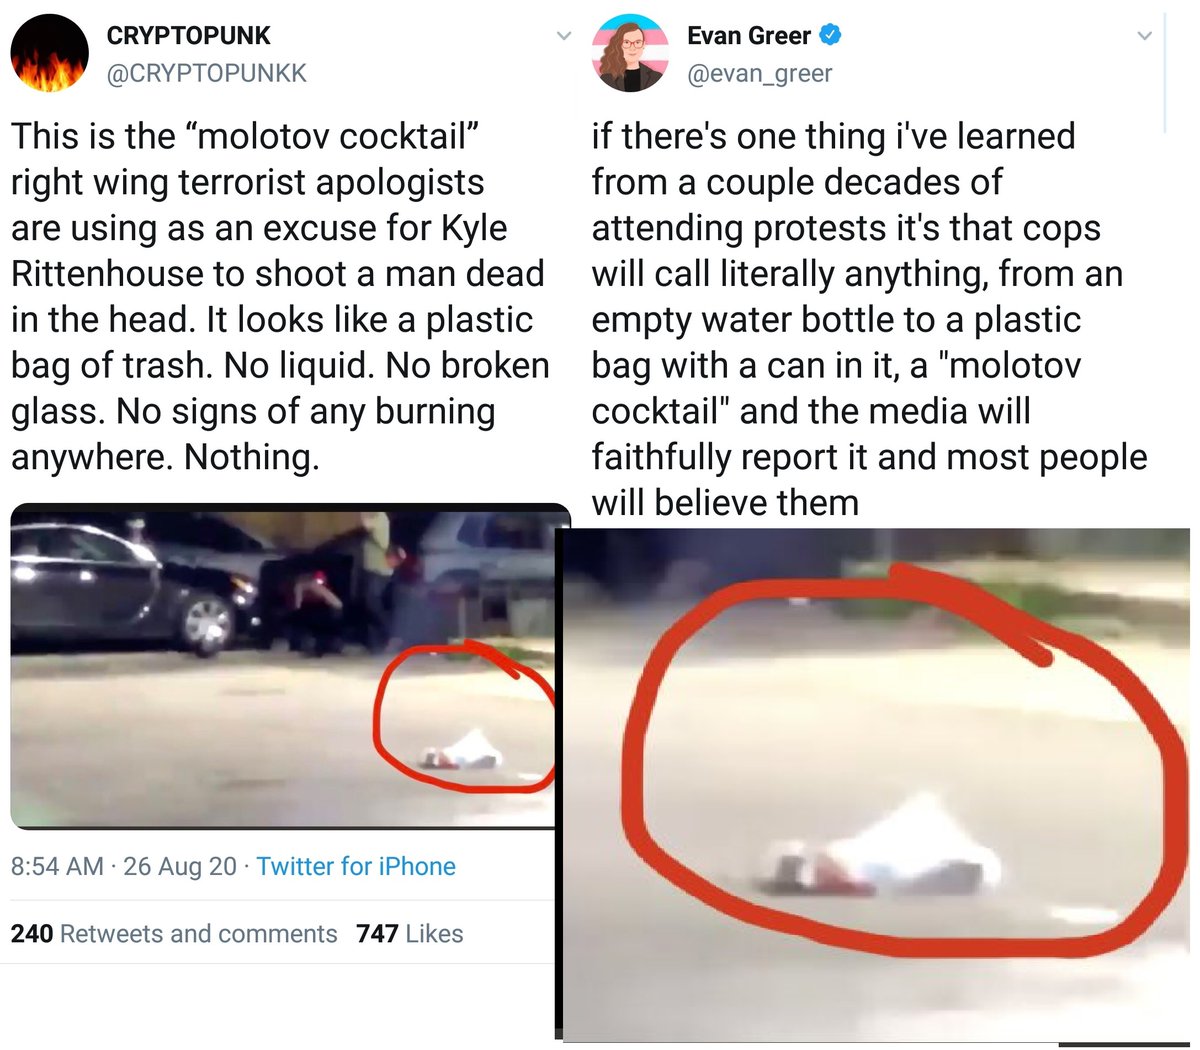 8/Next both sides humiliate themselves. First, the right said rioters threw a Molotov cocktail at Kyle as he ran from them.This is false, the video in tweet 5 shows whatever was thrown didn't catch fire like Molotov cocktails do. Closeups show it was almost certainly a bag